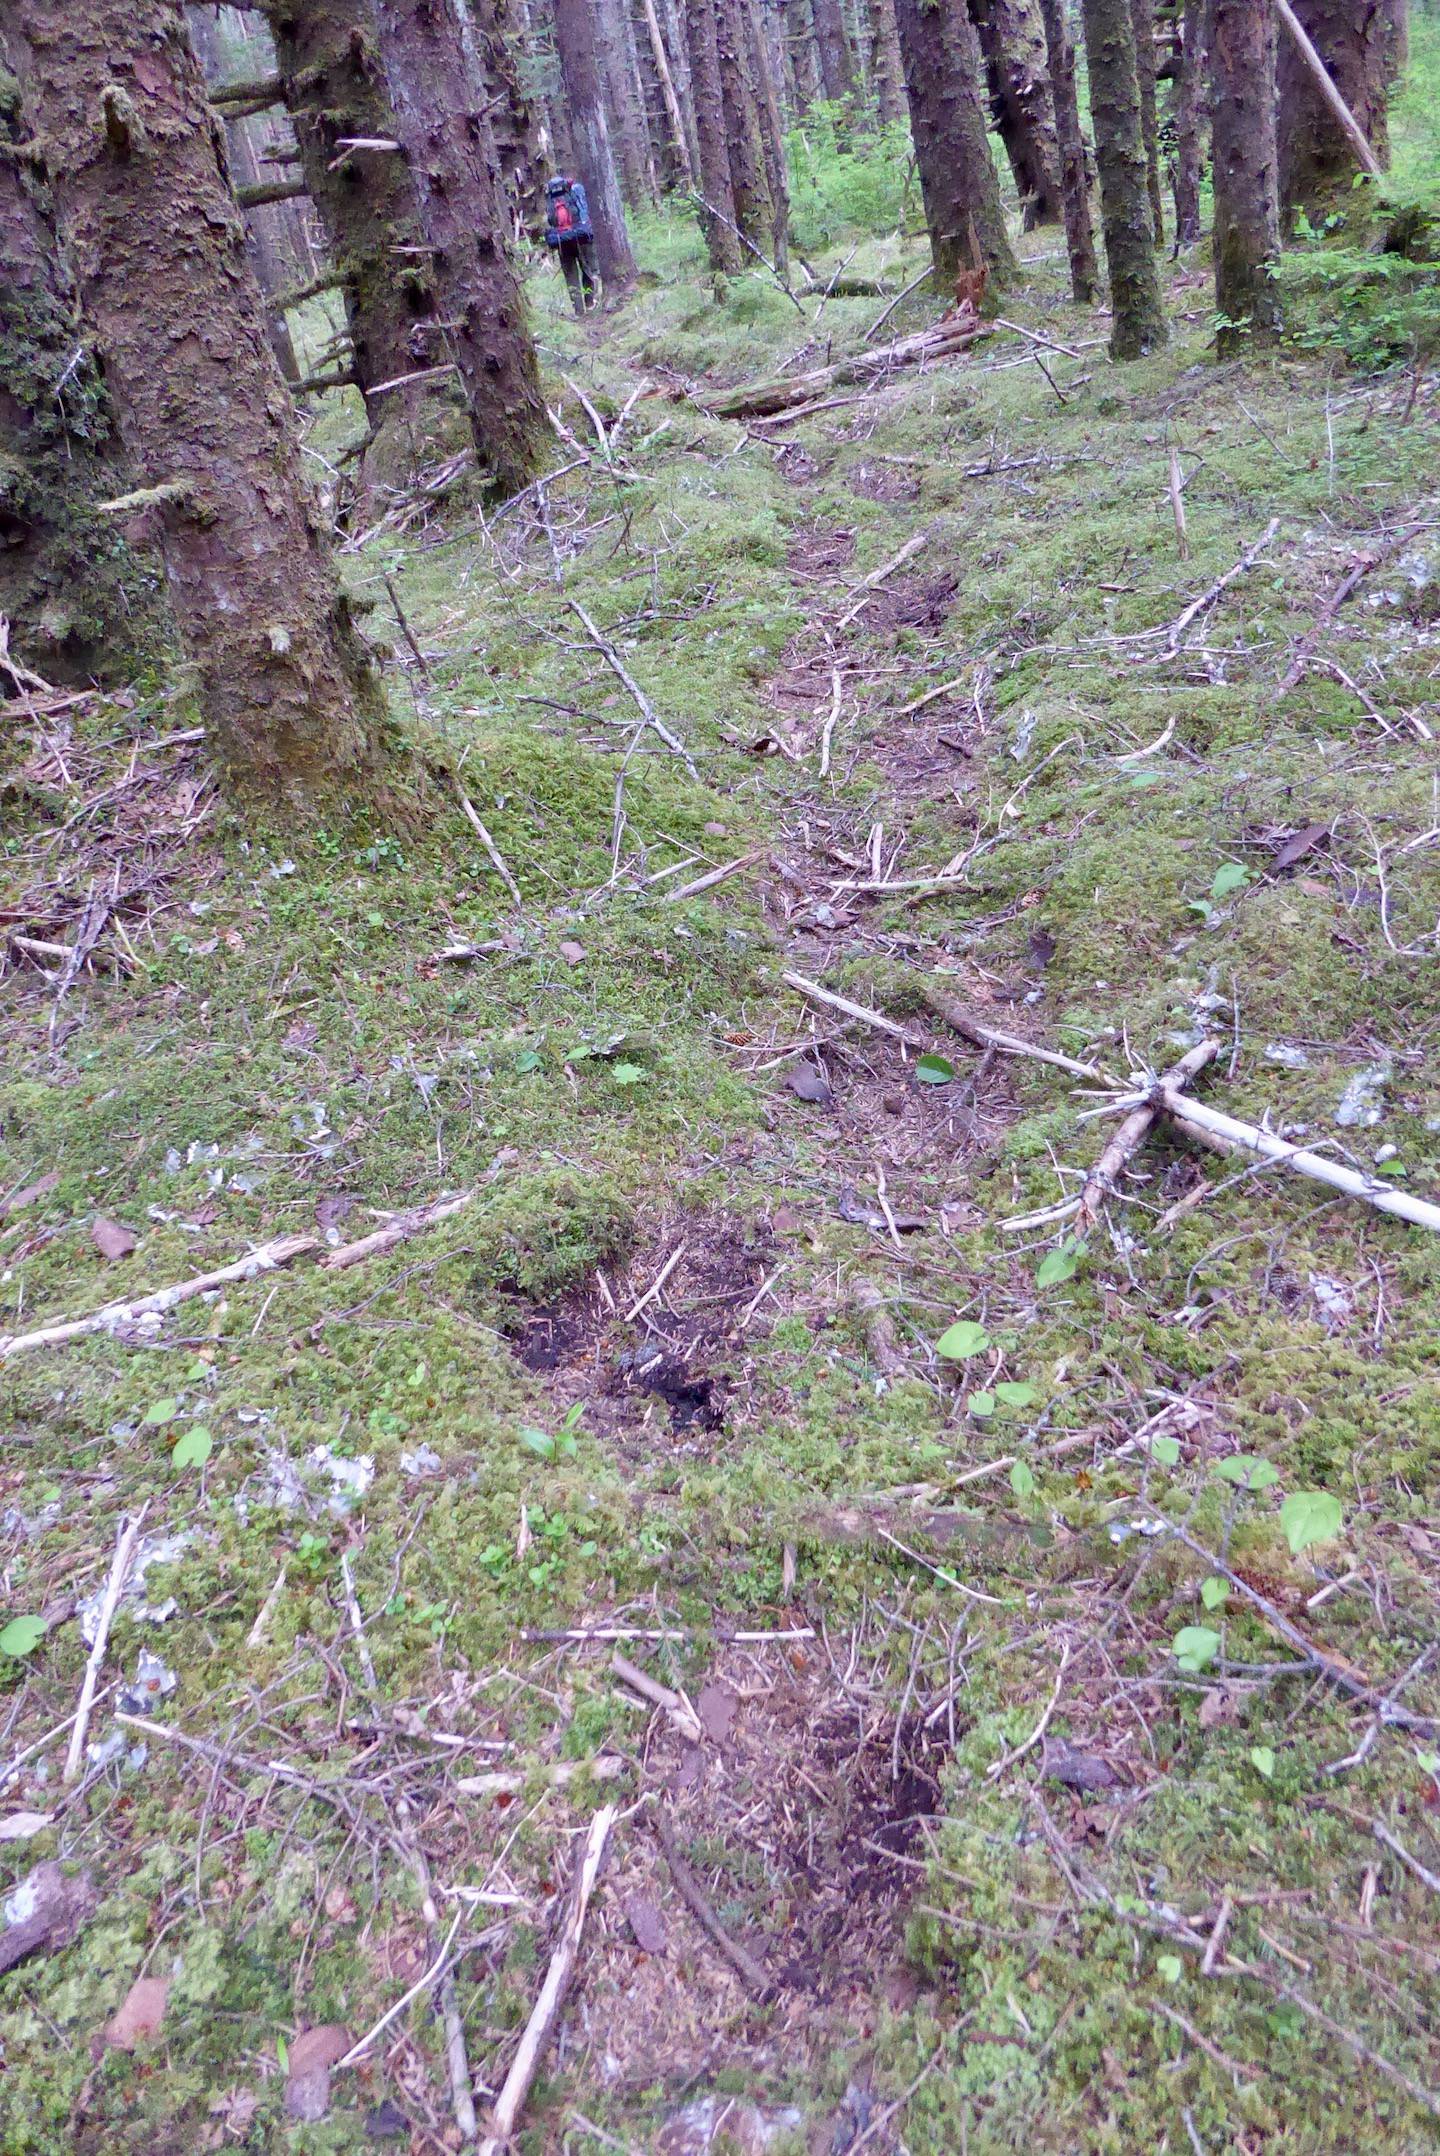 Researchers follow a grizzly bear trail in the forest just off the Lost Coast of Southeast Alaska, north of Lituya Bay